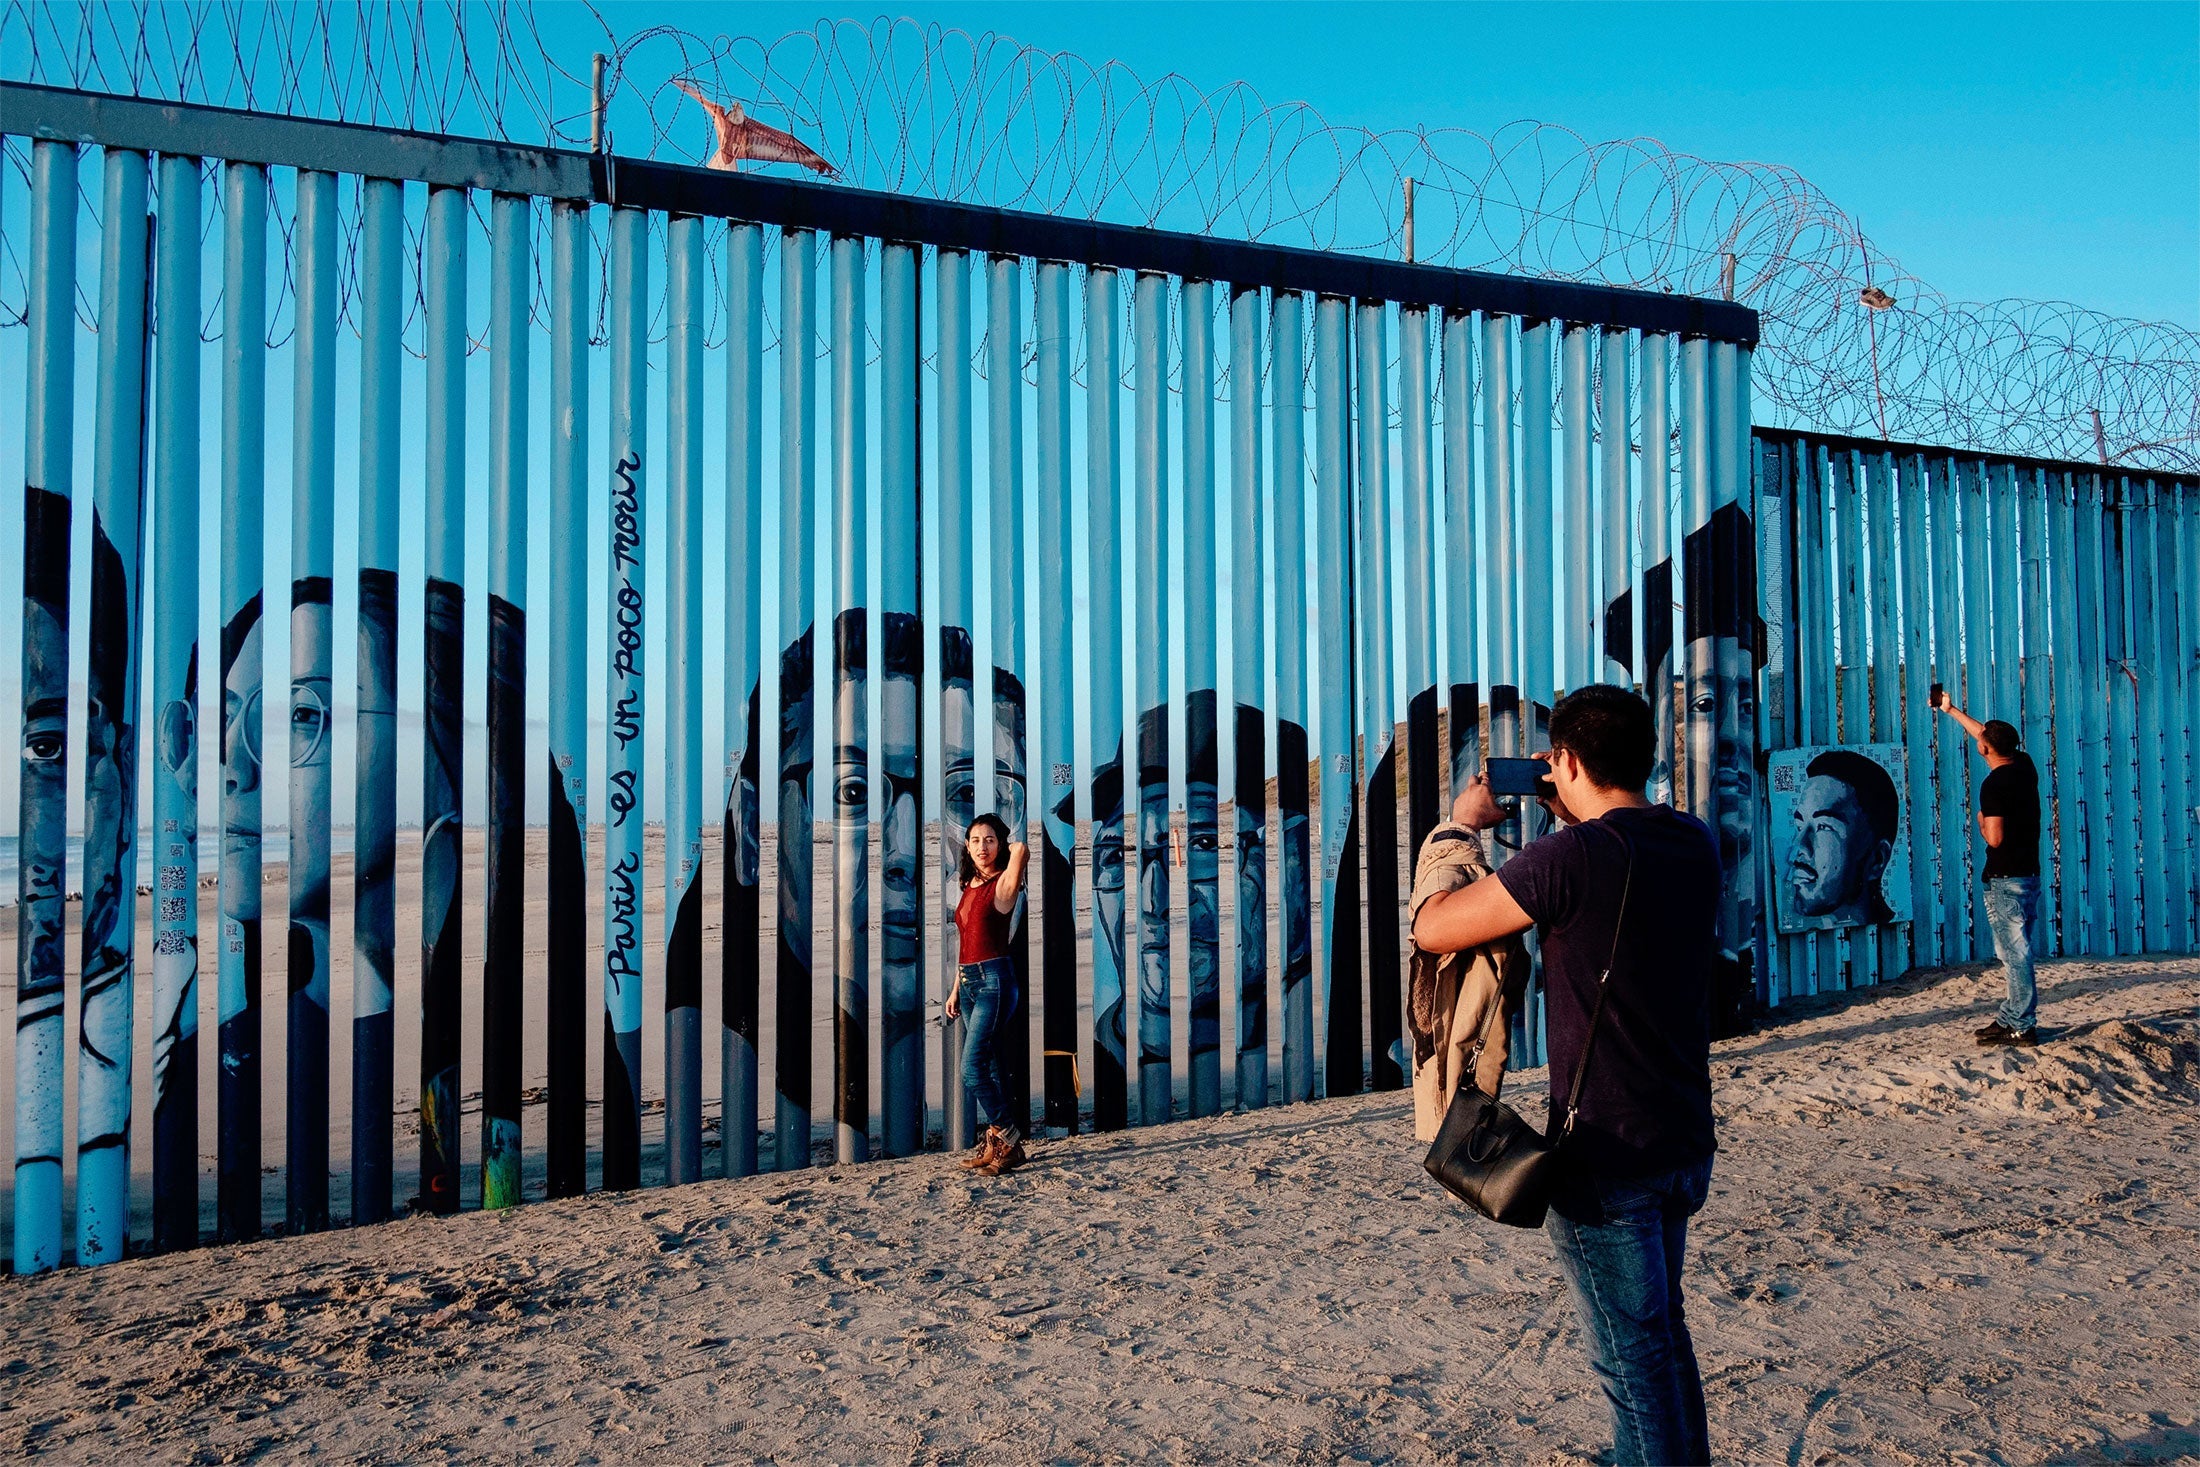 A visitor takes a picture of a woman posing in front of the US-Mexico border fence in Playas de Tijuana.